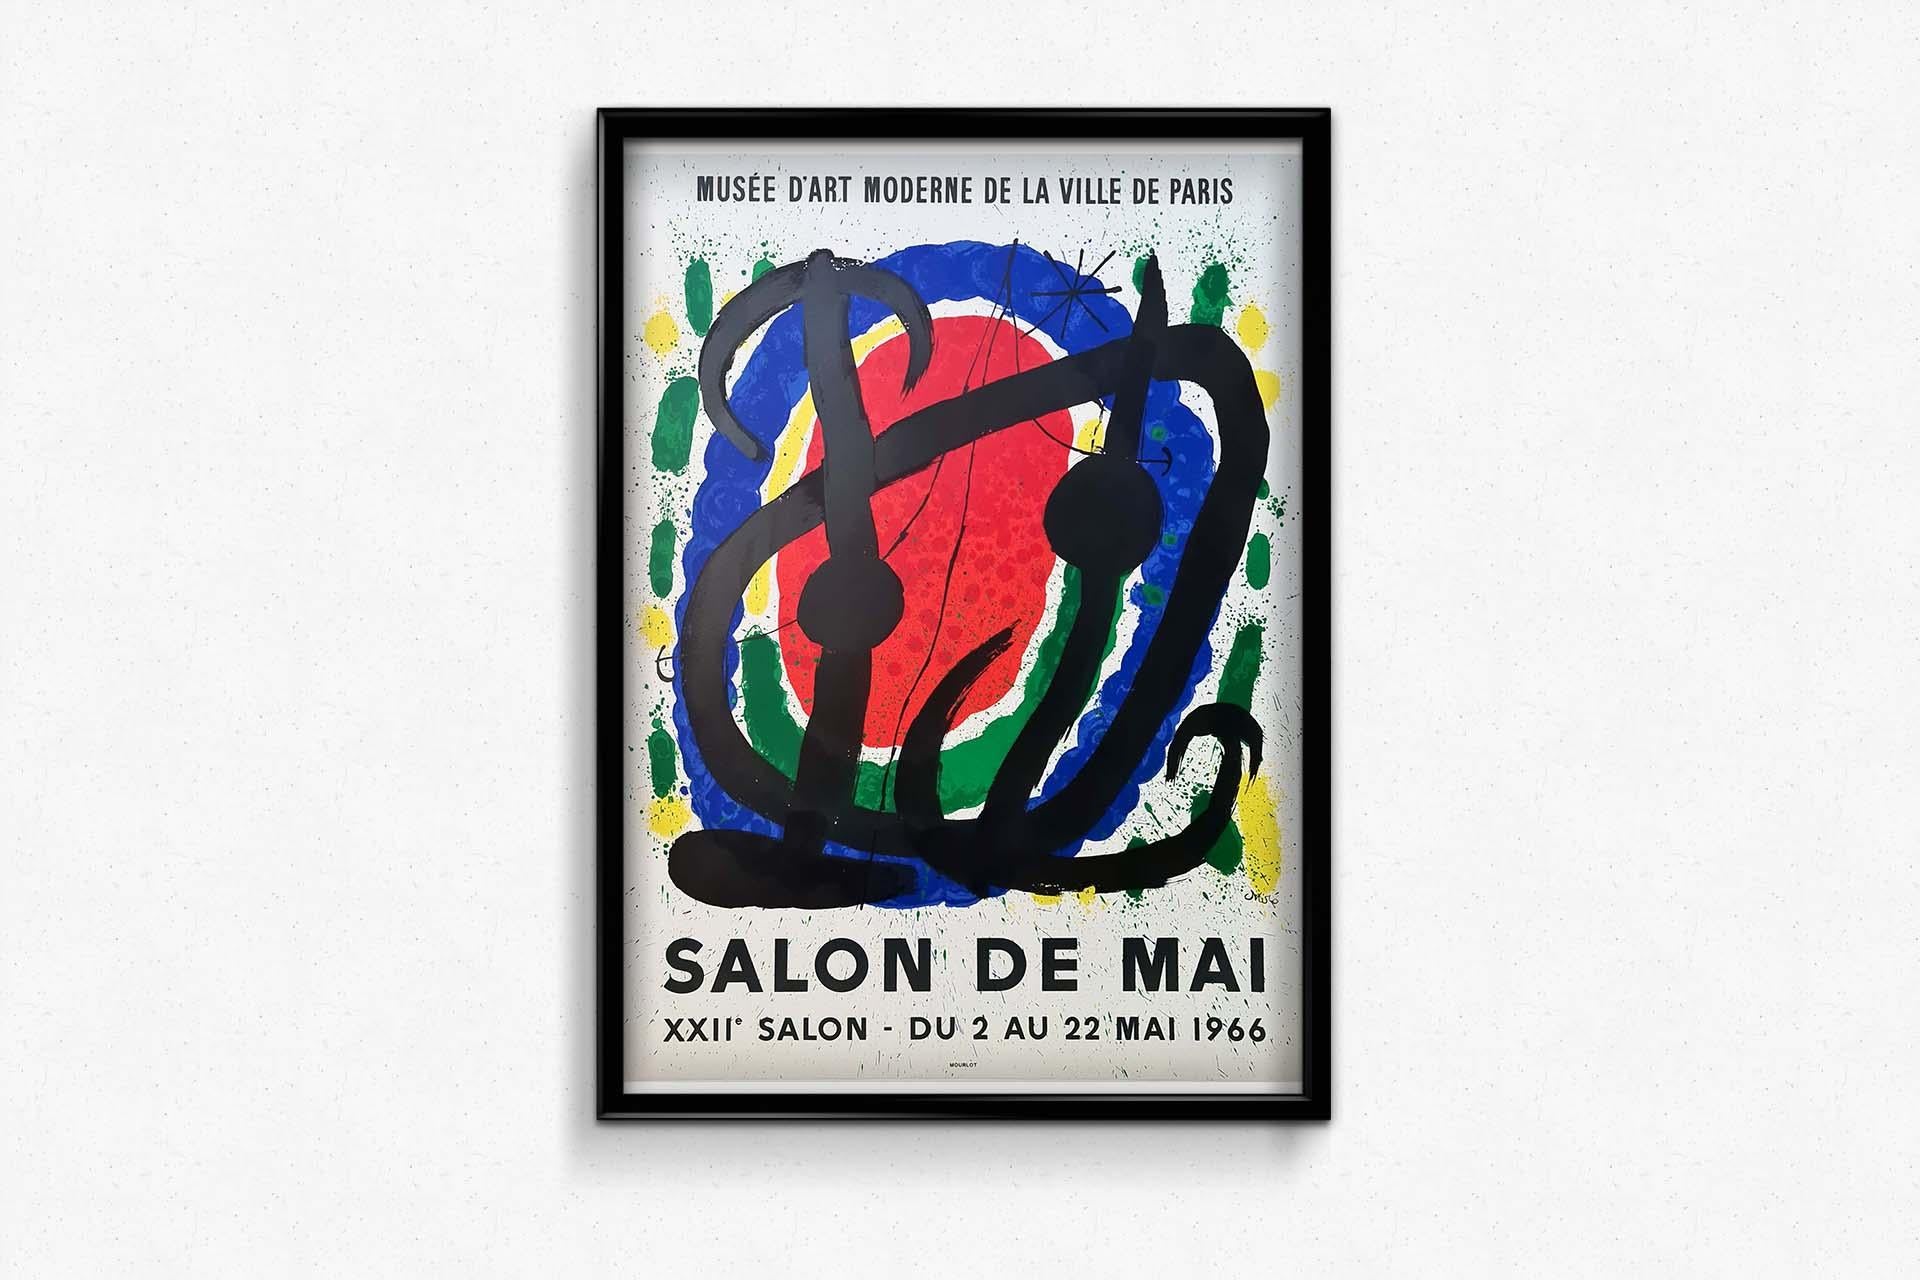 Beautiful poster of Joan Miro of 1966 for the XXIIth Salon de Mai.

Widely considered one of the leading Surrealists (though he was never officially part of the group), Joan Miró was also a pioneer of automatism: a method of spontaneous drawing that